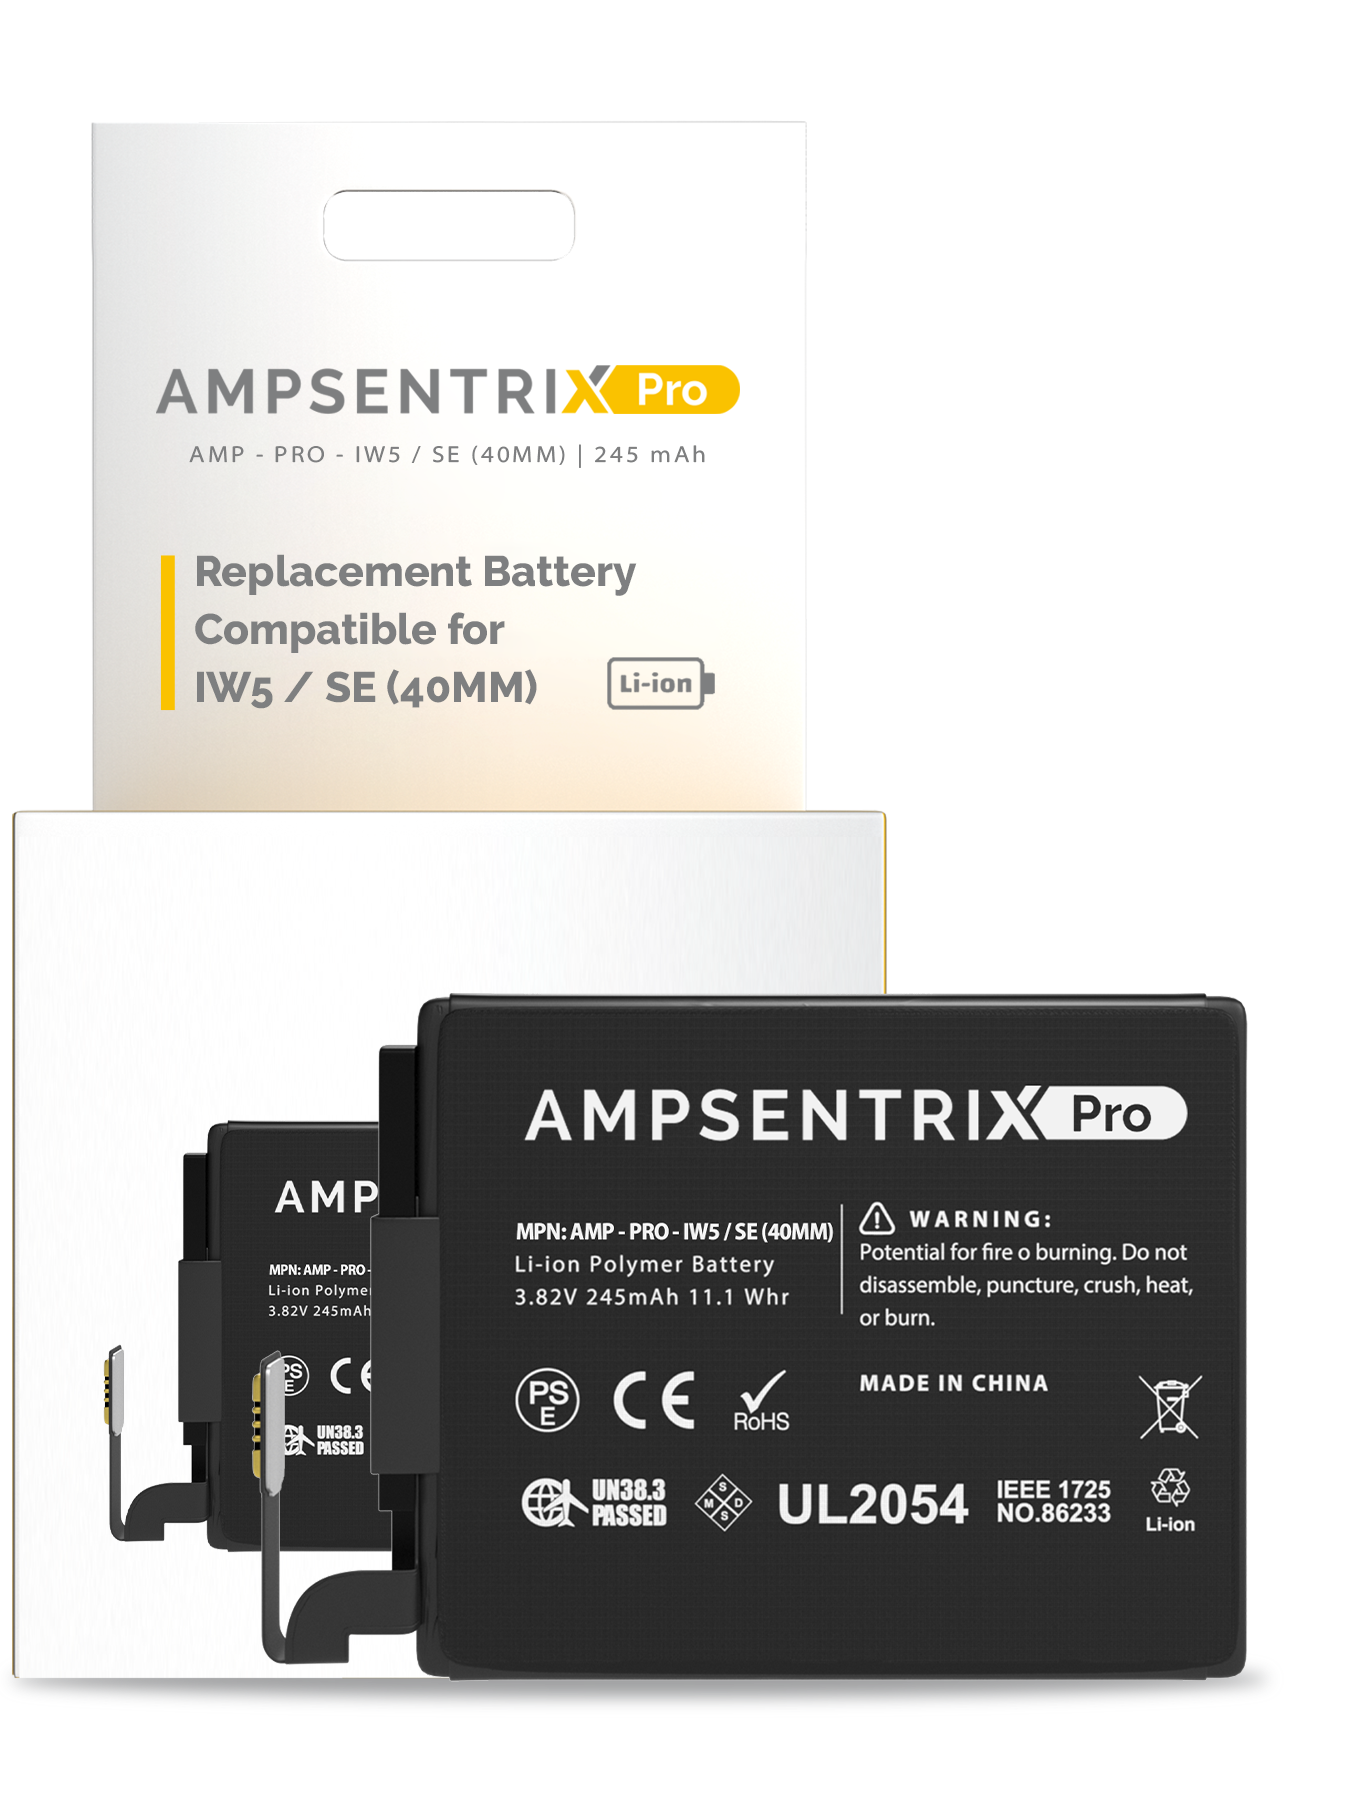 Replacement Battery Compatible For Watch Series 5 / SE (40MM) (AmpSentrix Pro)